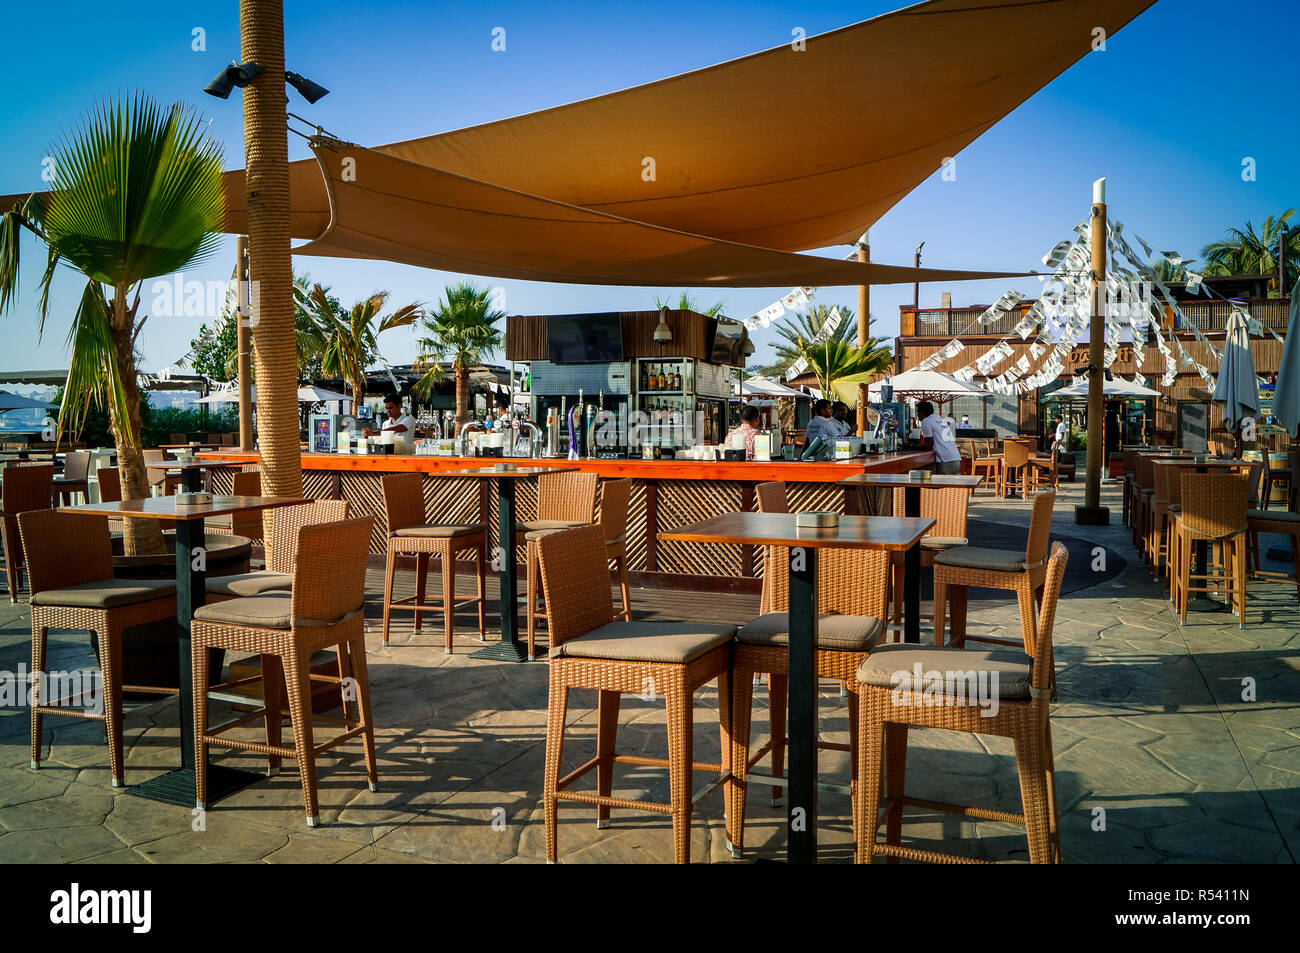 Beautiful and cozy beach bar next to the ocean. Stock Photo